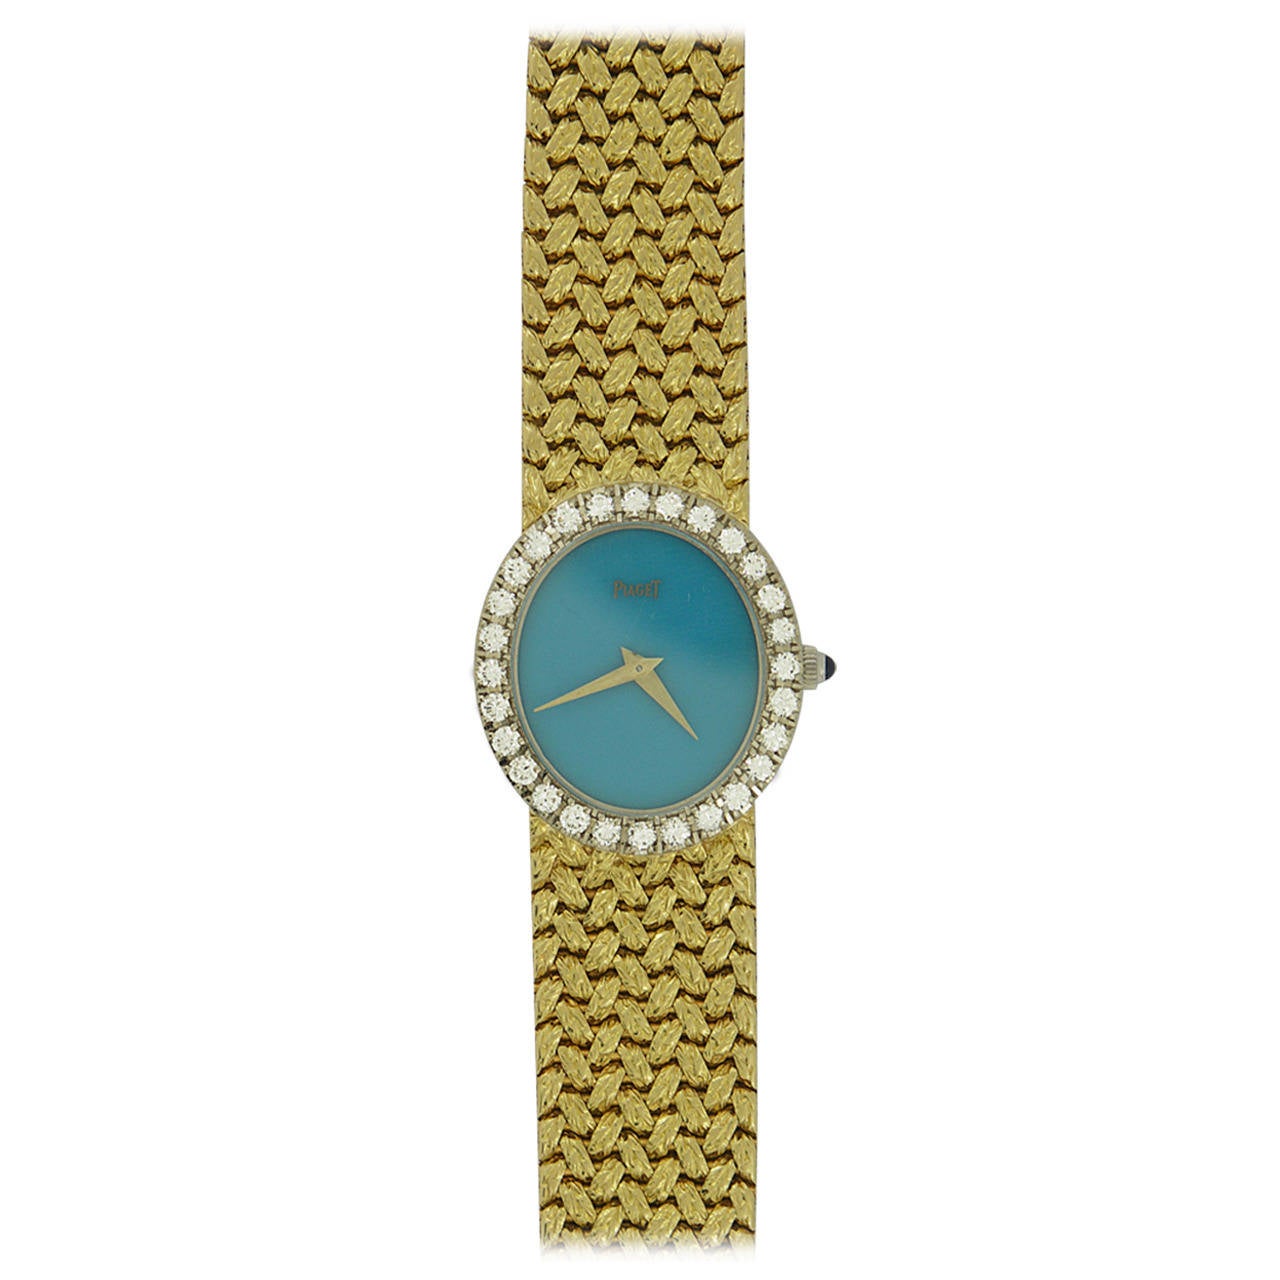 Piaget Lady's Yellow Gold Turquoise Dial Wristwatch